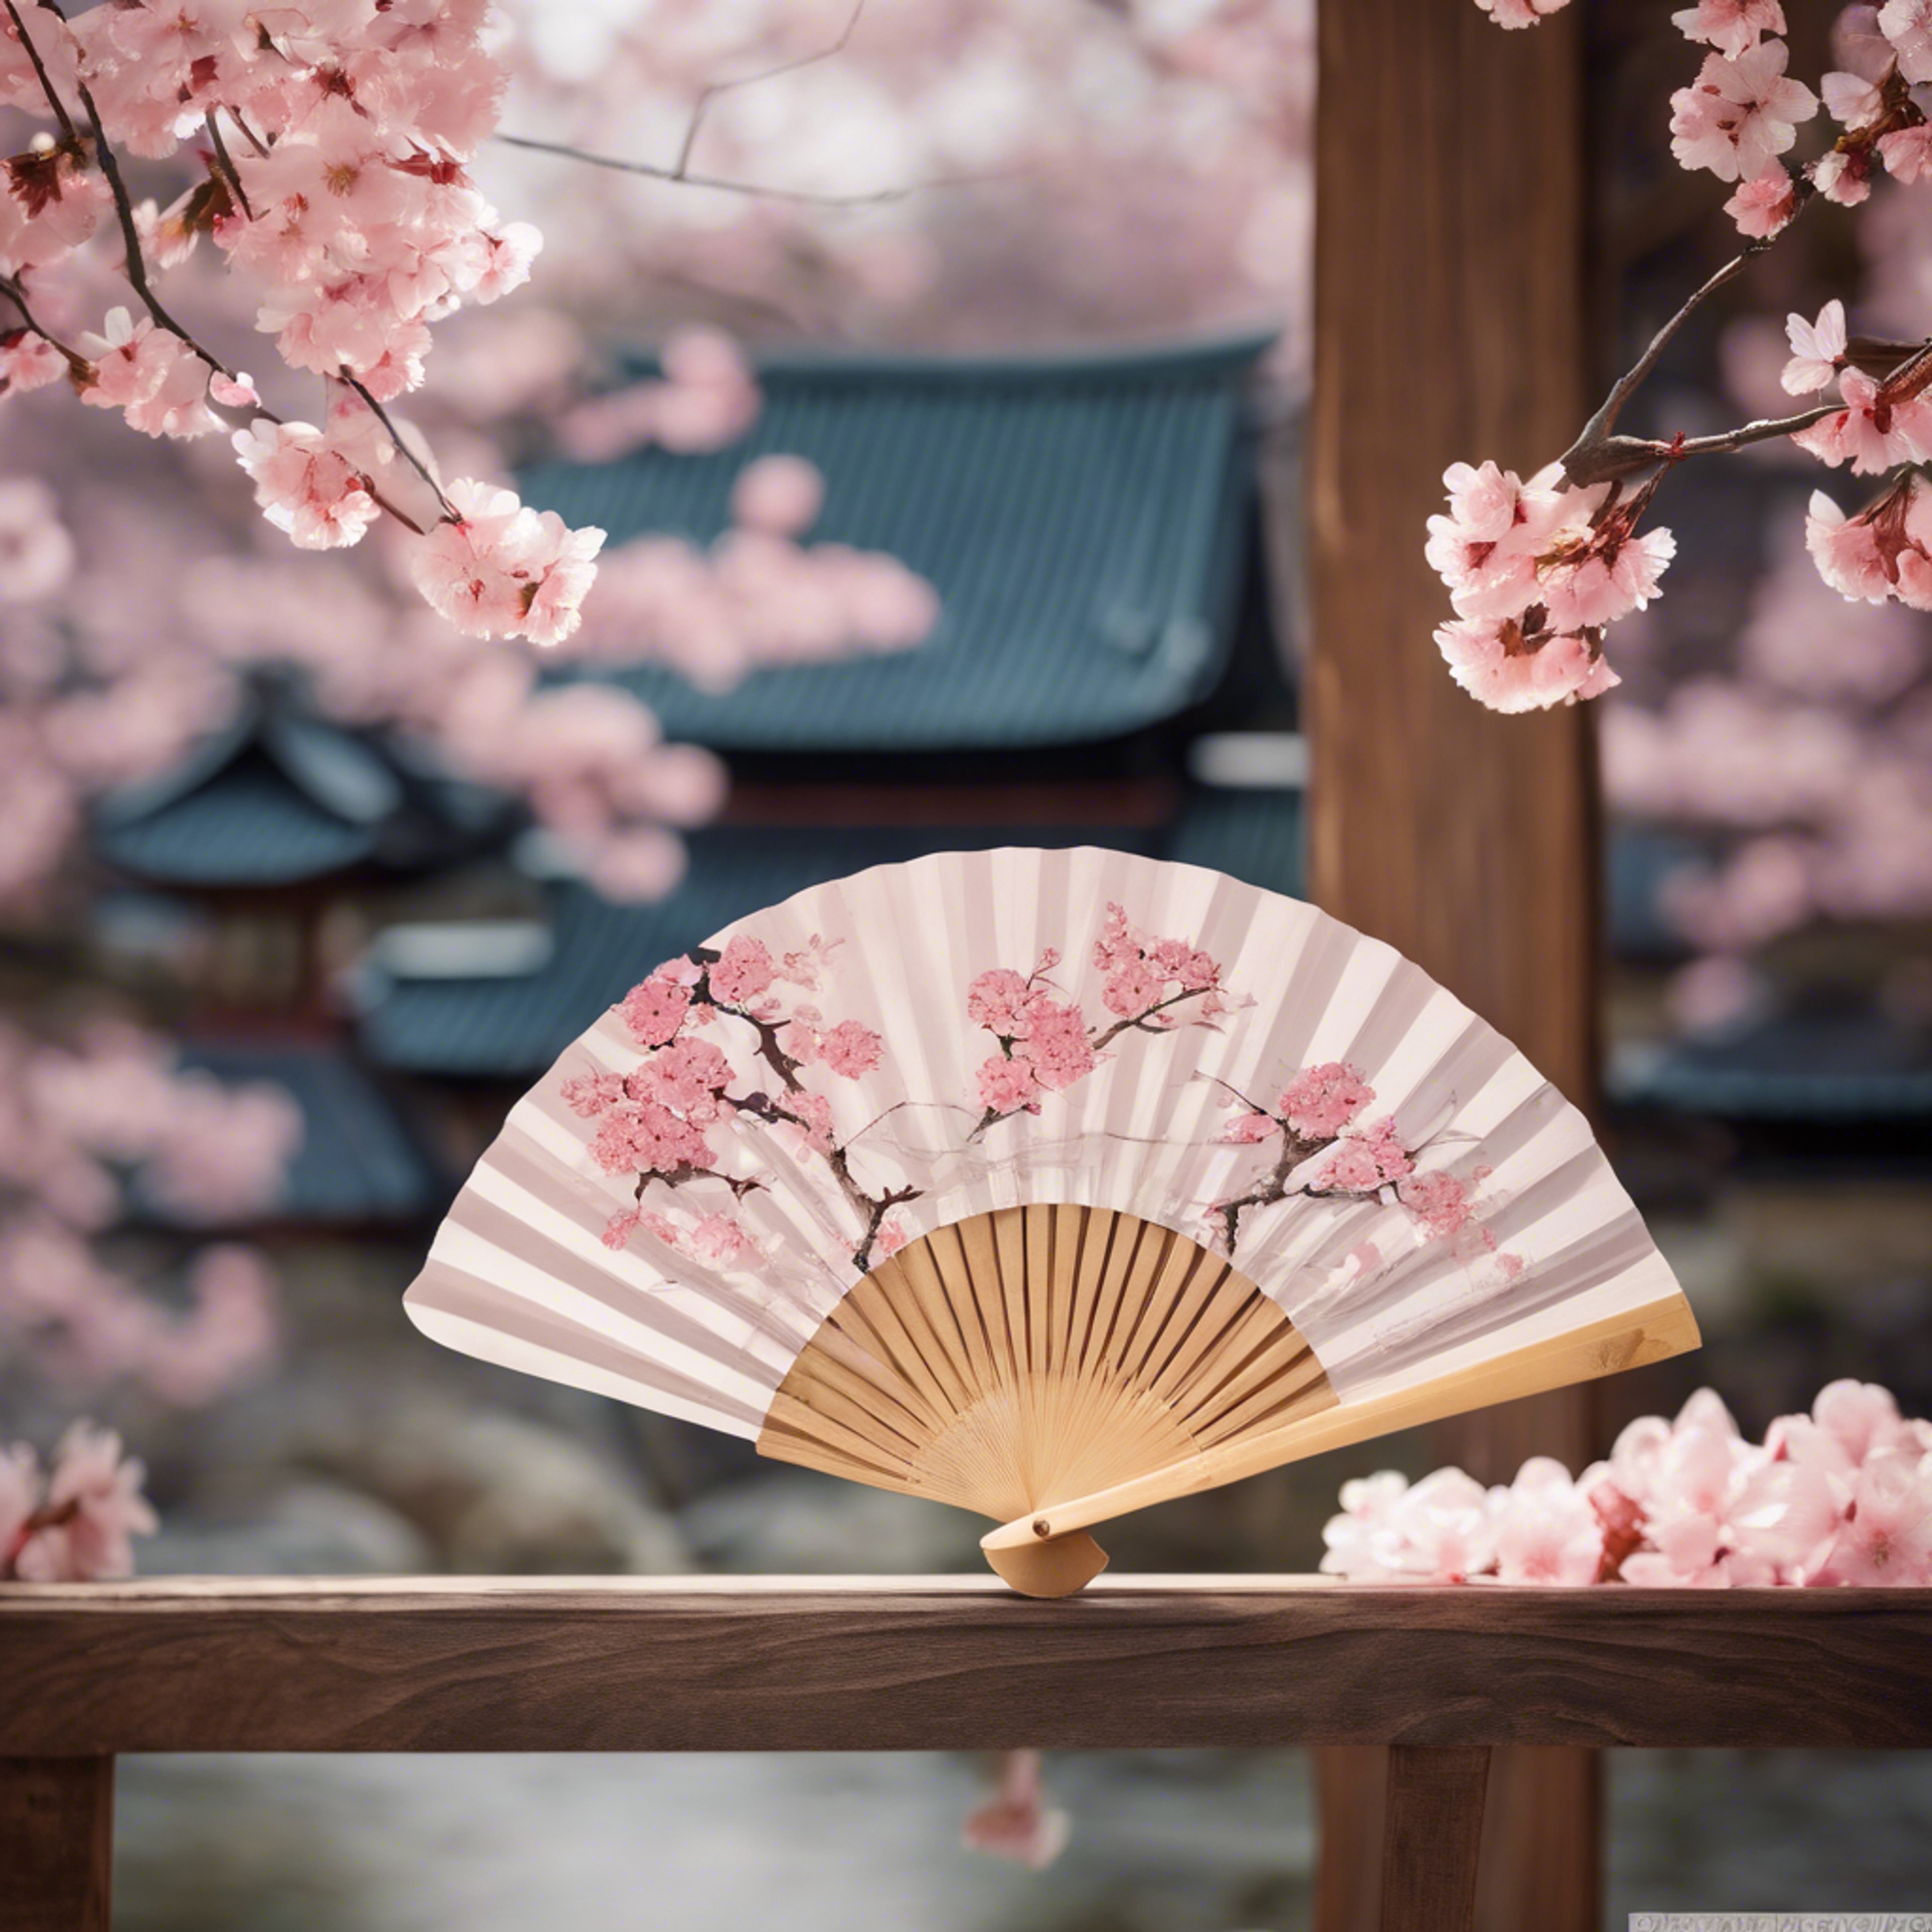 A paper fan painted with a delicate cherry blossom design, viewed against the backdrop of a traditional Japanese tea ceremony.壁紙[1c1907a73a8e4558b265]